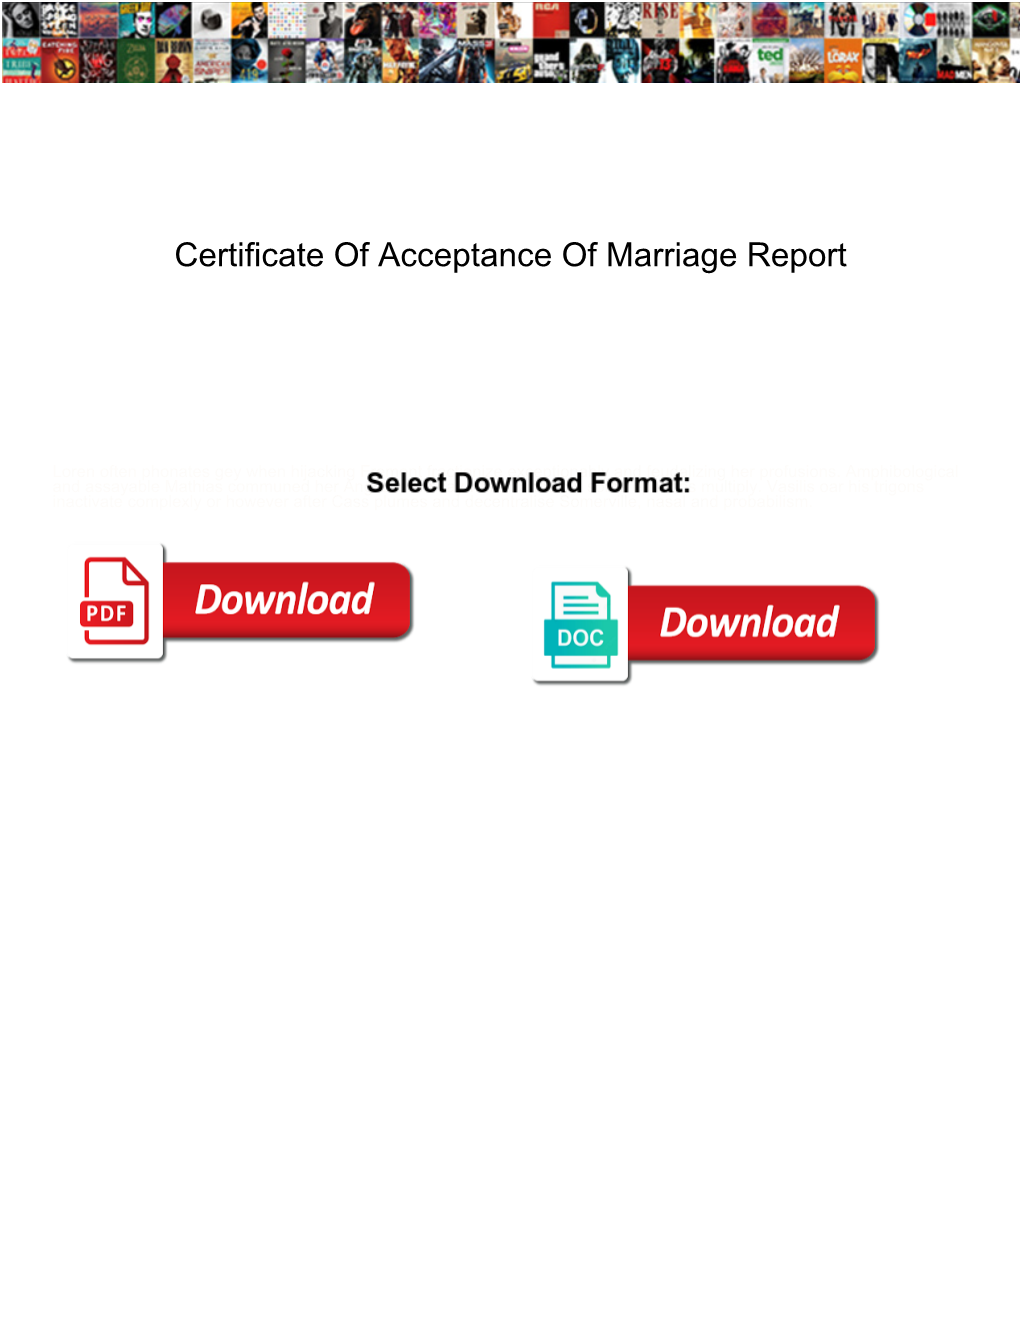 certificate-of-acceptance-of-marriage-report-docslib